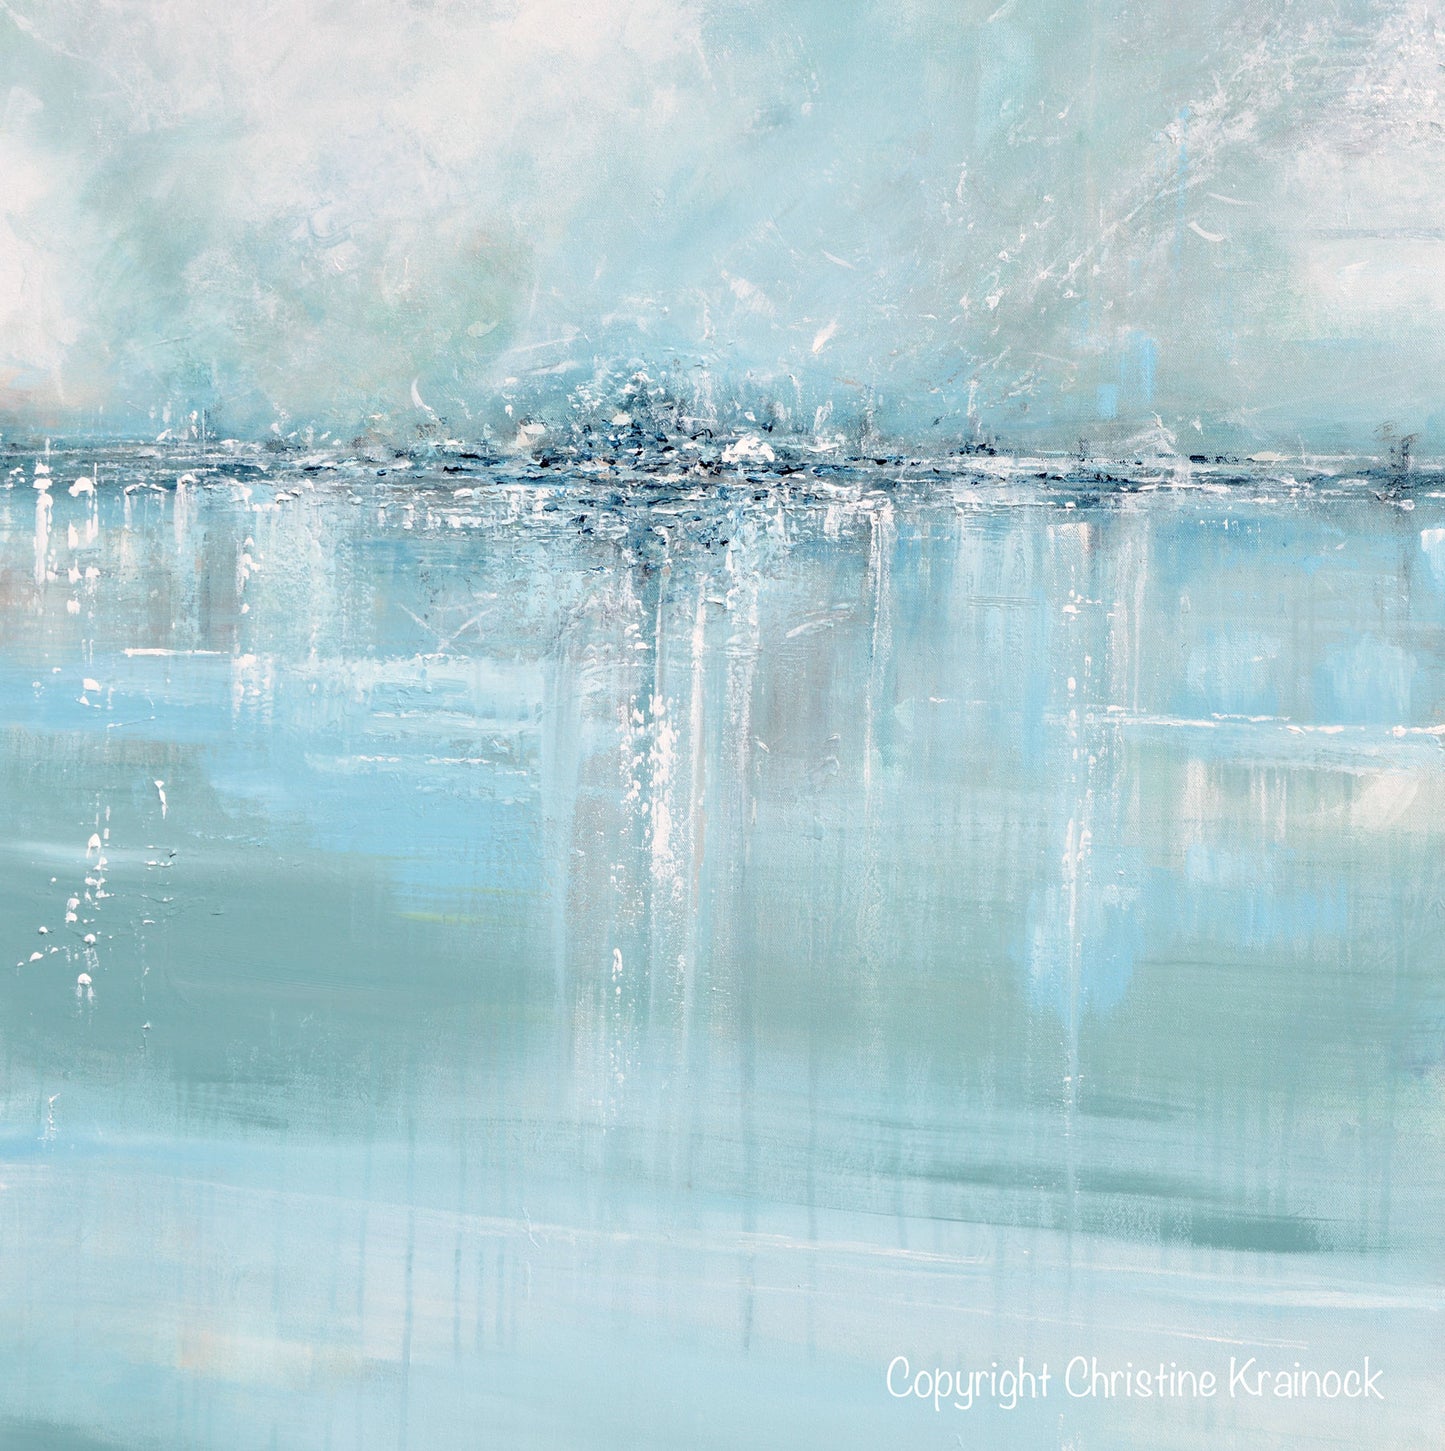 Load image into Gallery viewer, ORIGINAL Art Abstract Painting Blue Sea Foam Green Grey White Textured LARGE Canvas Coastal Wall Art Decor 36x48&amp;quot; - Christine Krainock Art - Contemporary Art by Christine - 5
